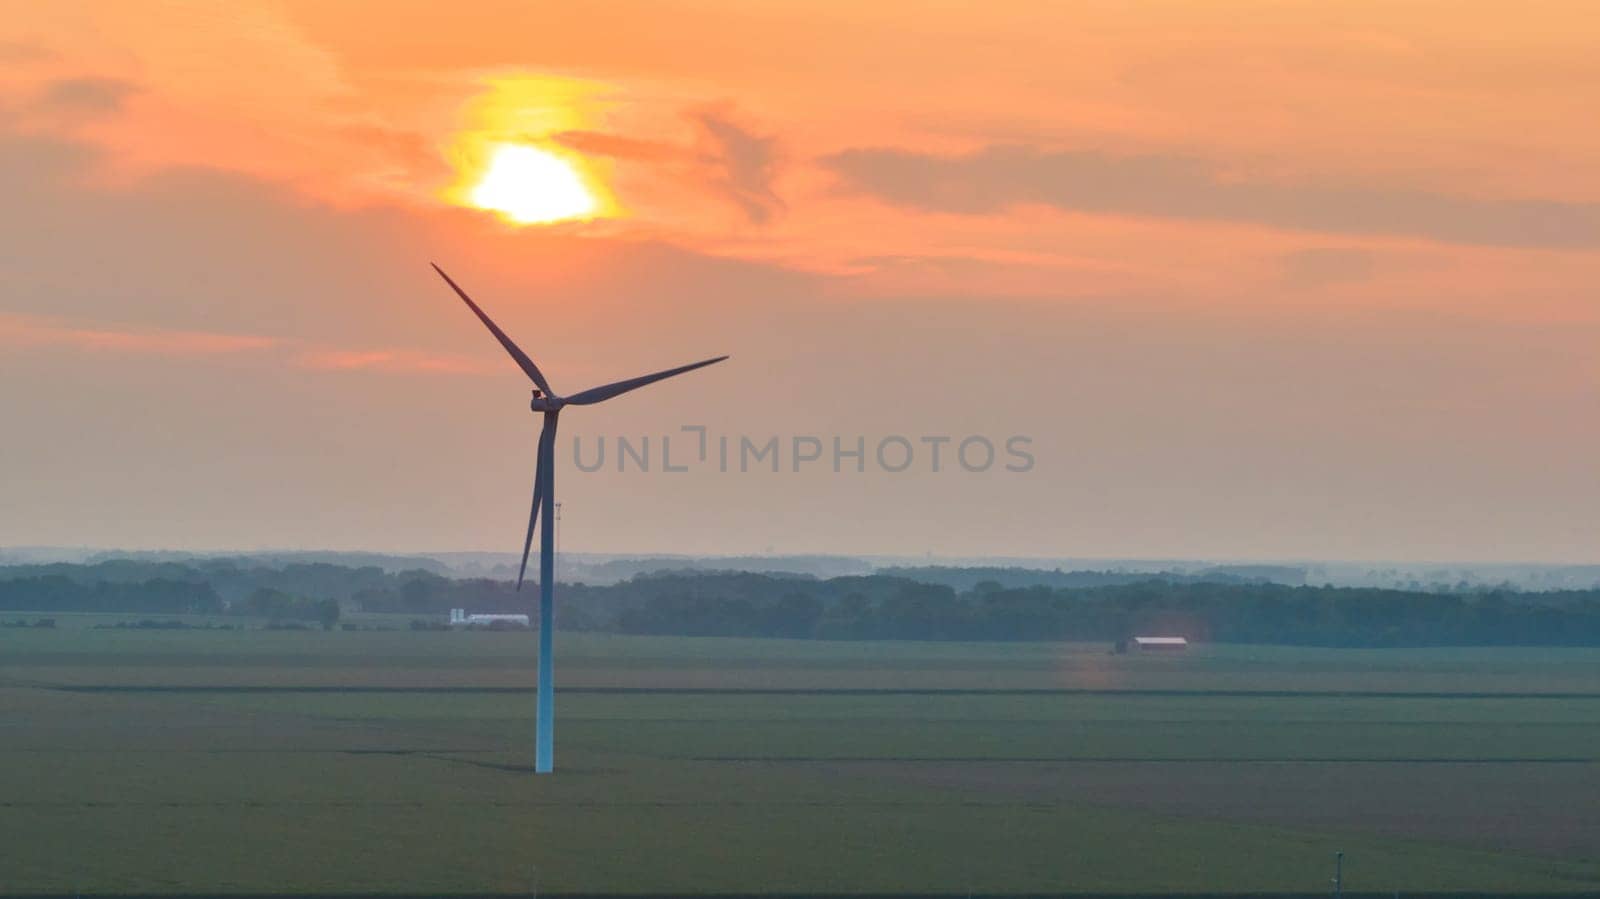 Lone wind turbine in field with orange sun over it at sunset aerial by njproductions